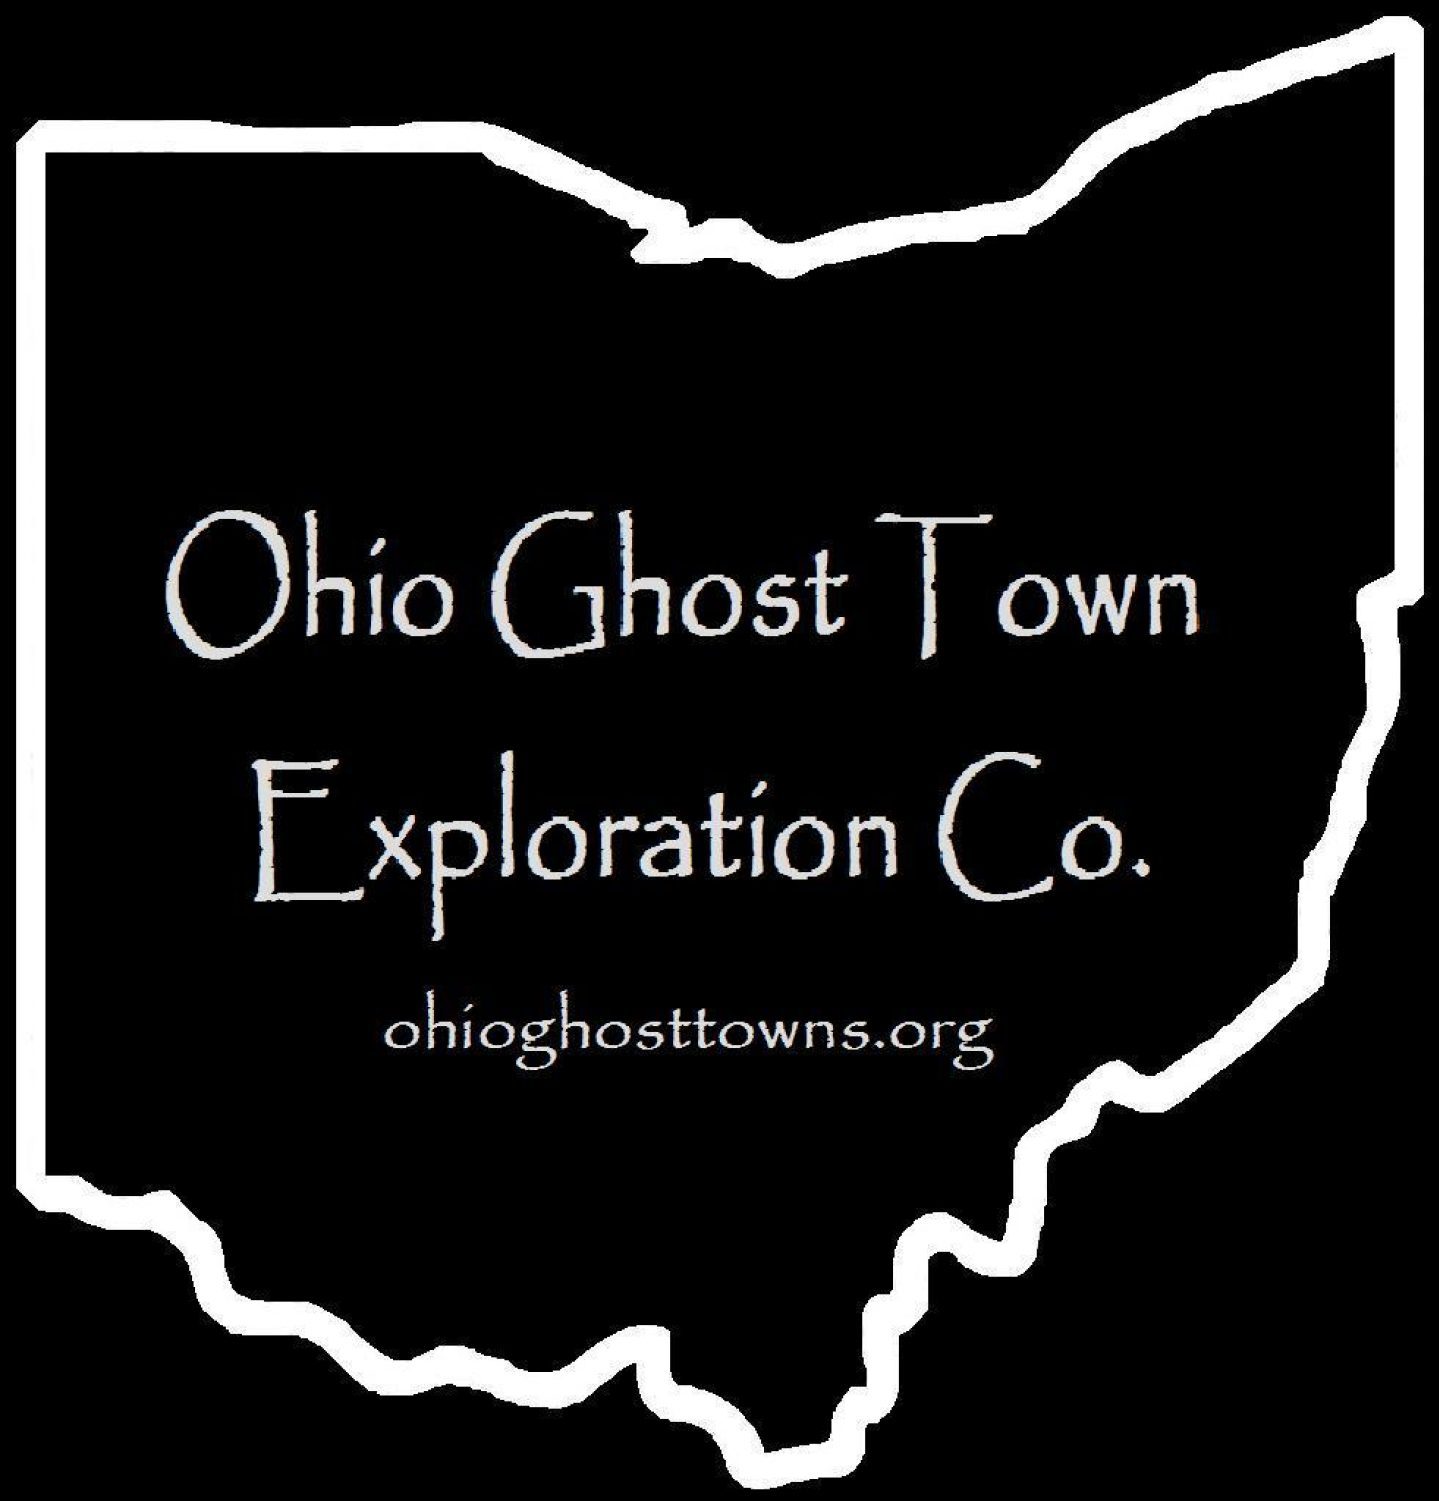 Ohio Ghost Town Exploration Co.